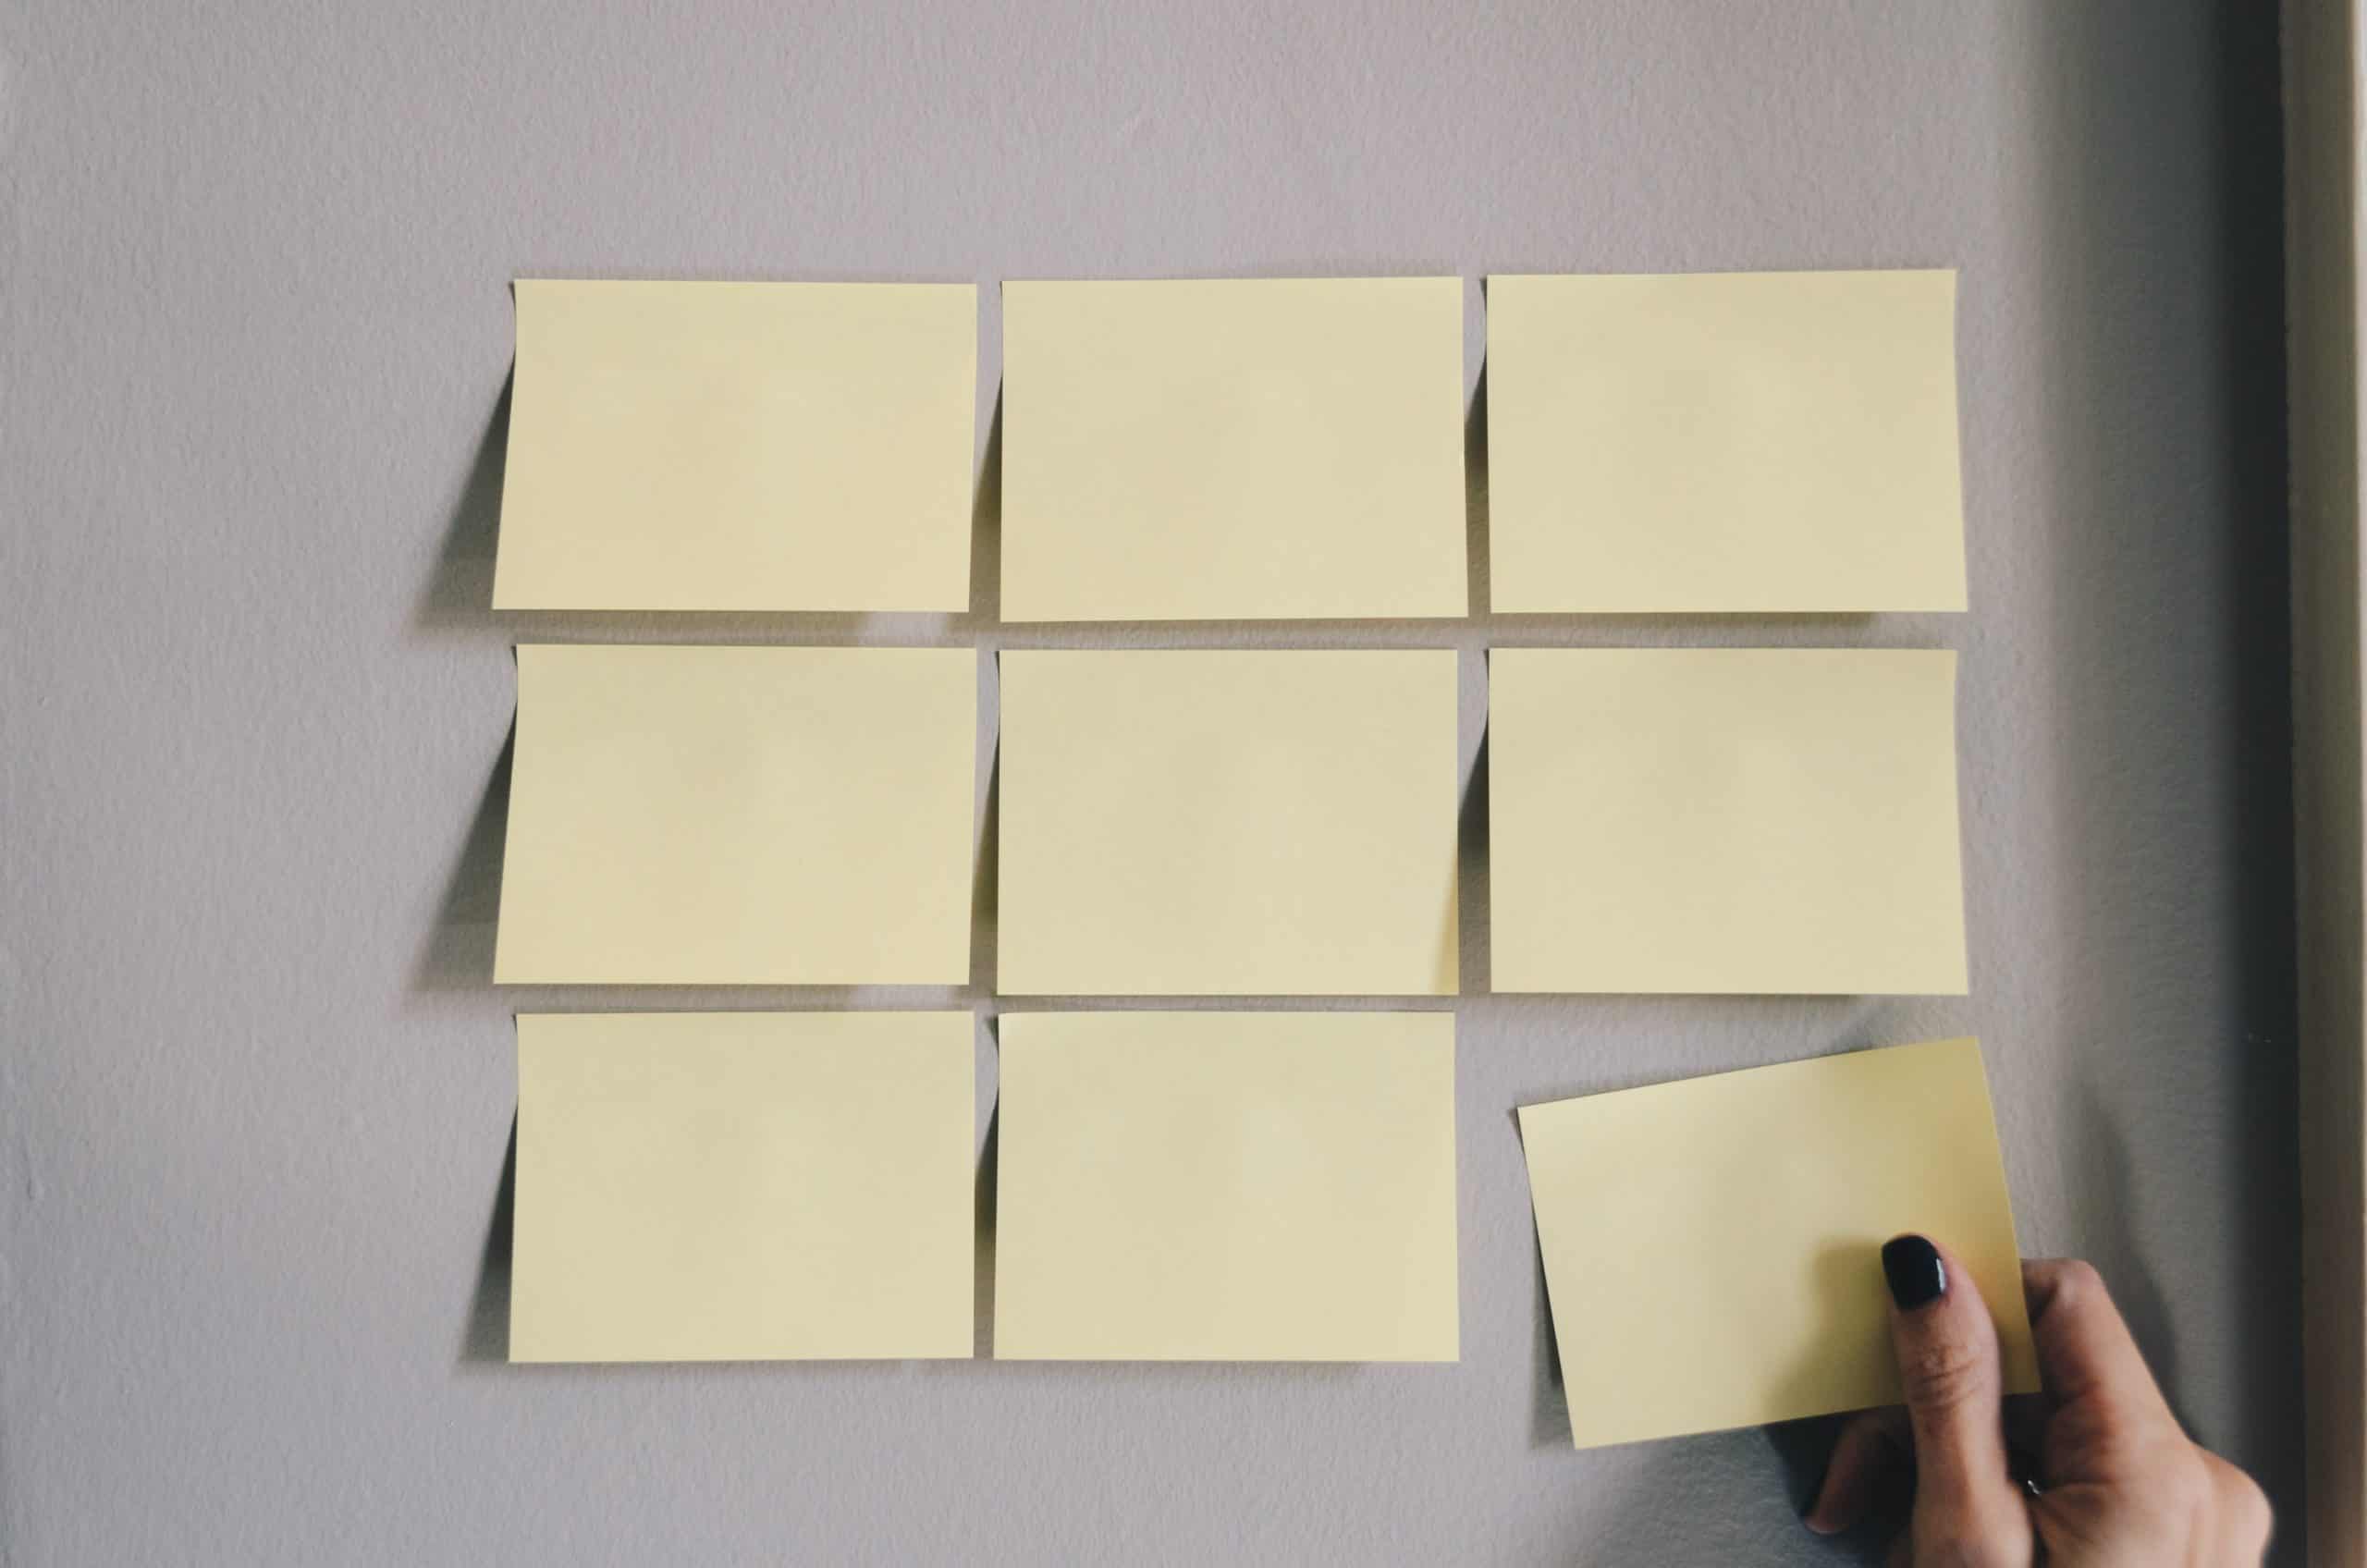 Post-It notes on a wall for planning purposes